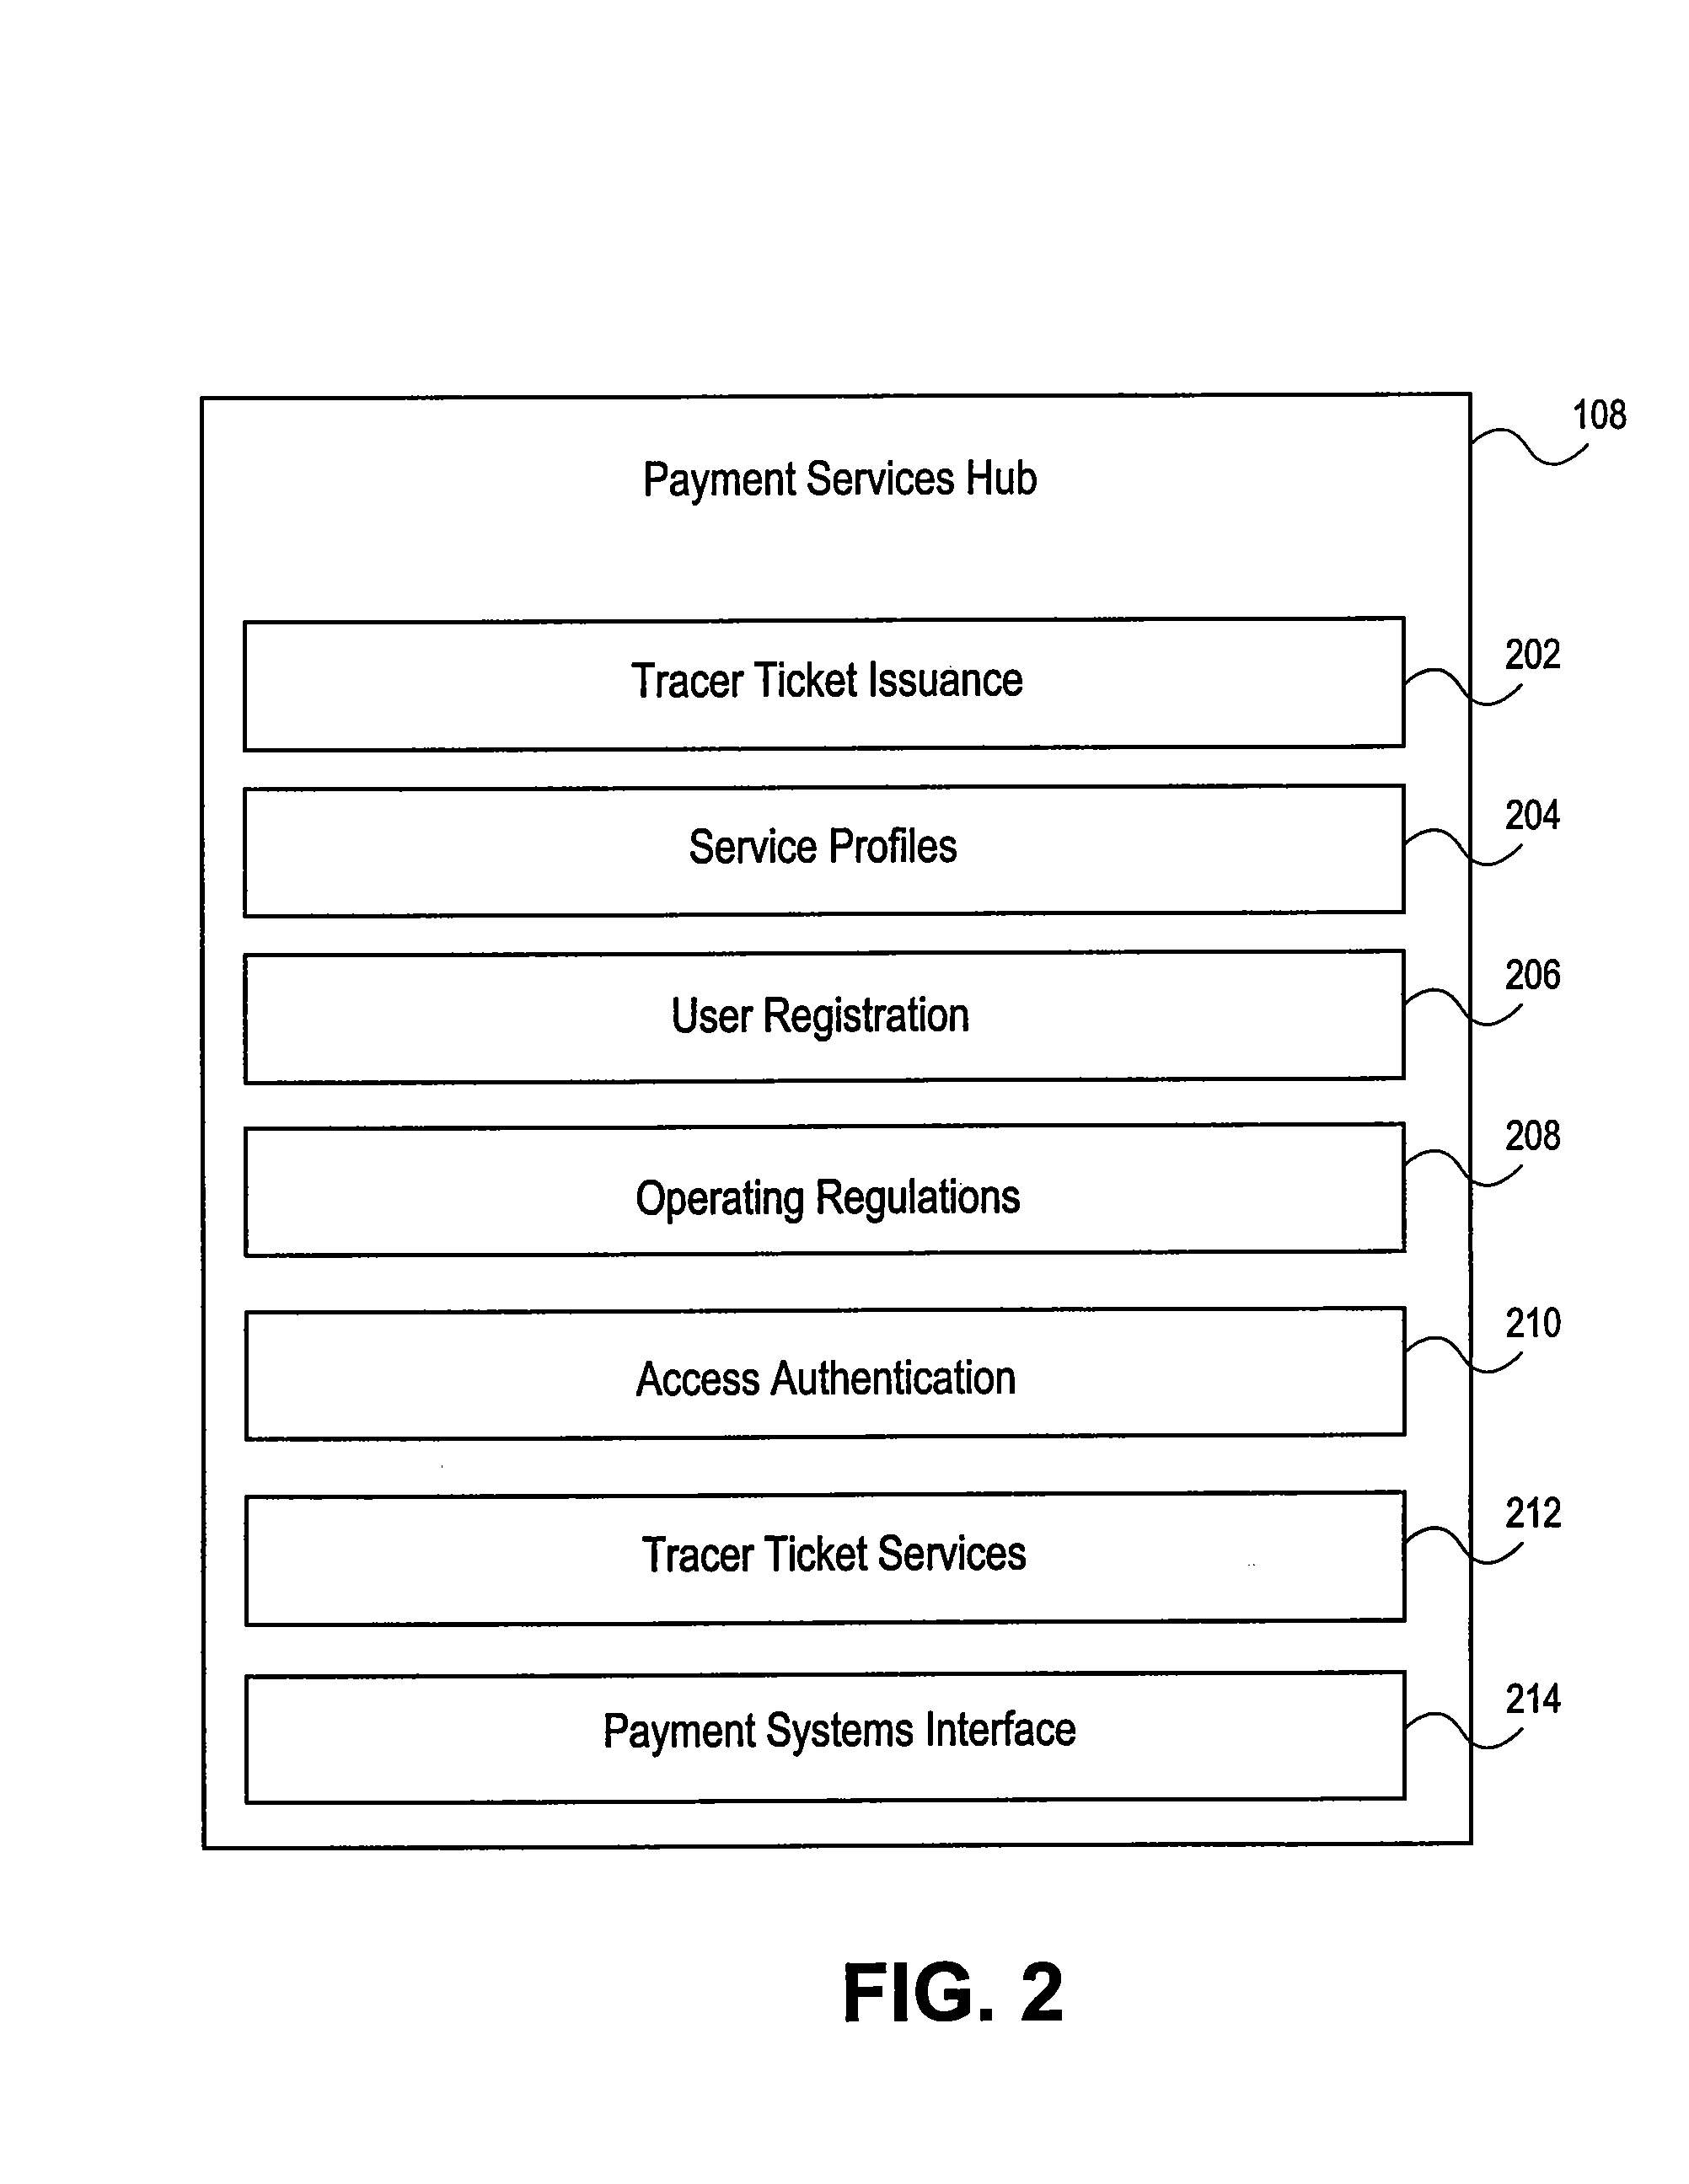 Method and system for facilitating payment transactions using access devices